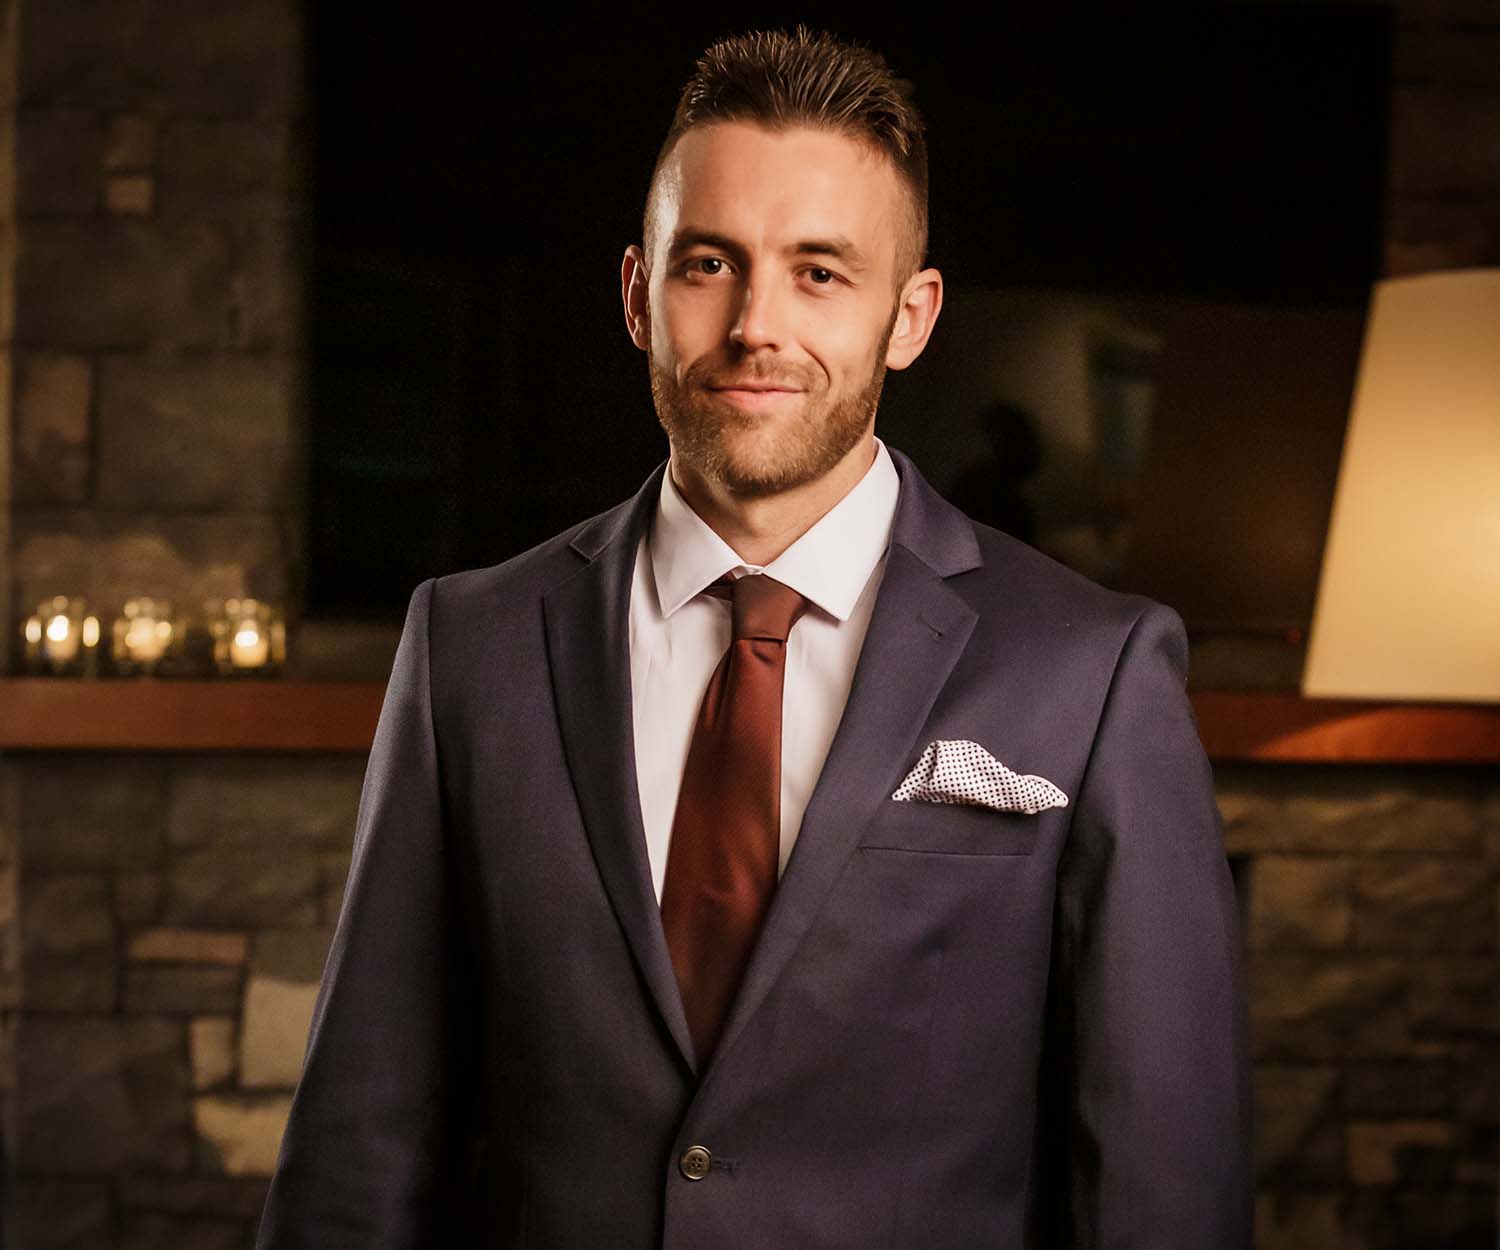 The Bachelorette’s Glenn on his shock at being kicked out and his biggest regret from the show